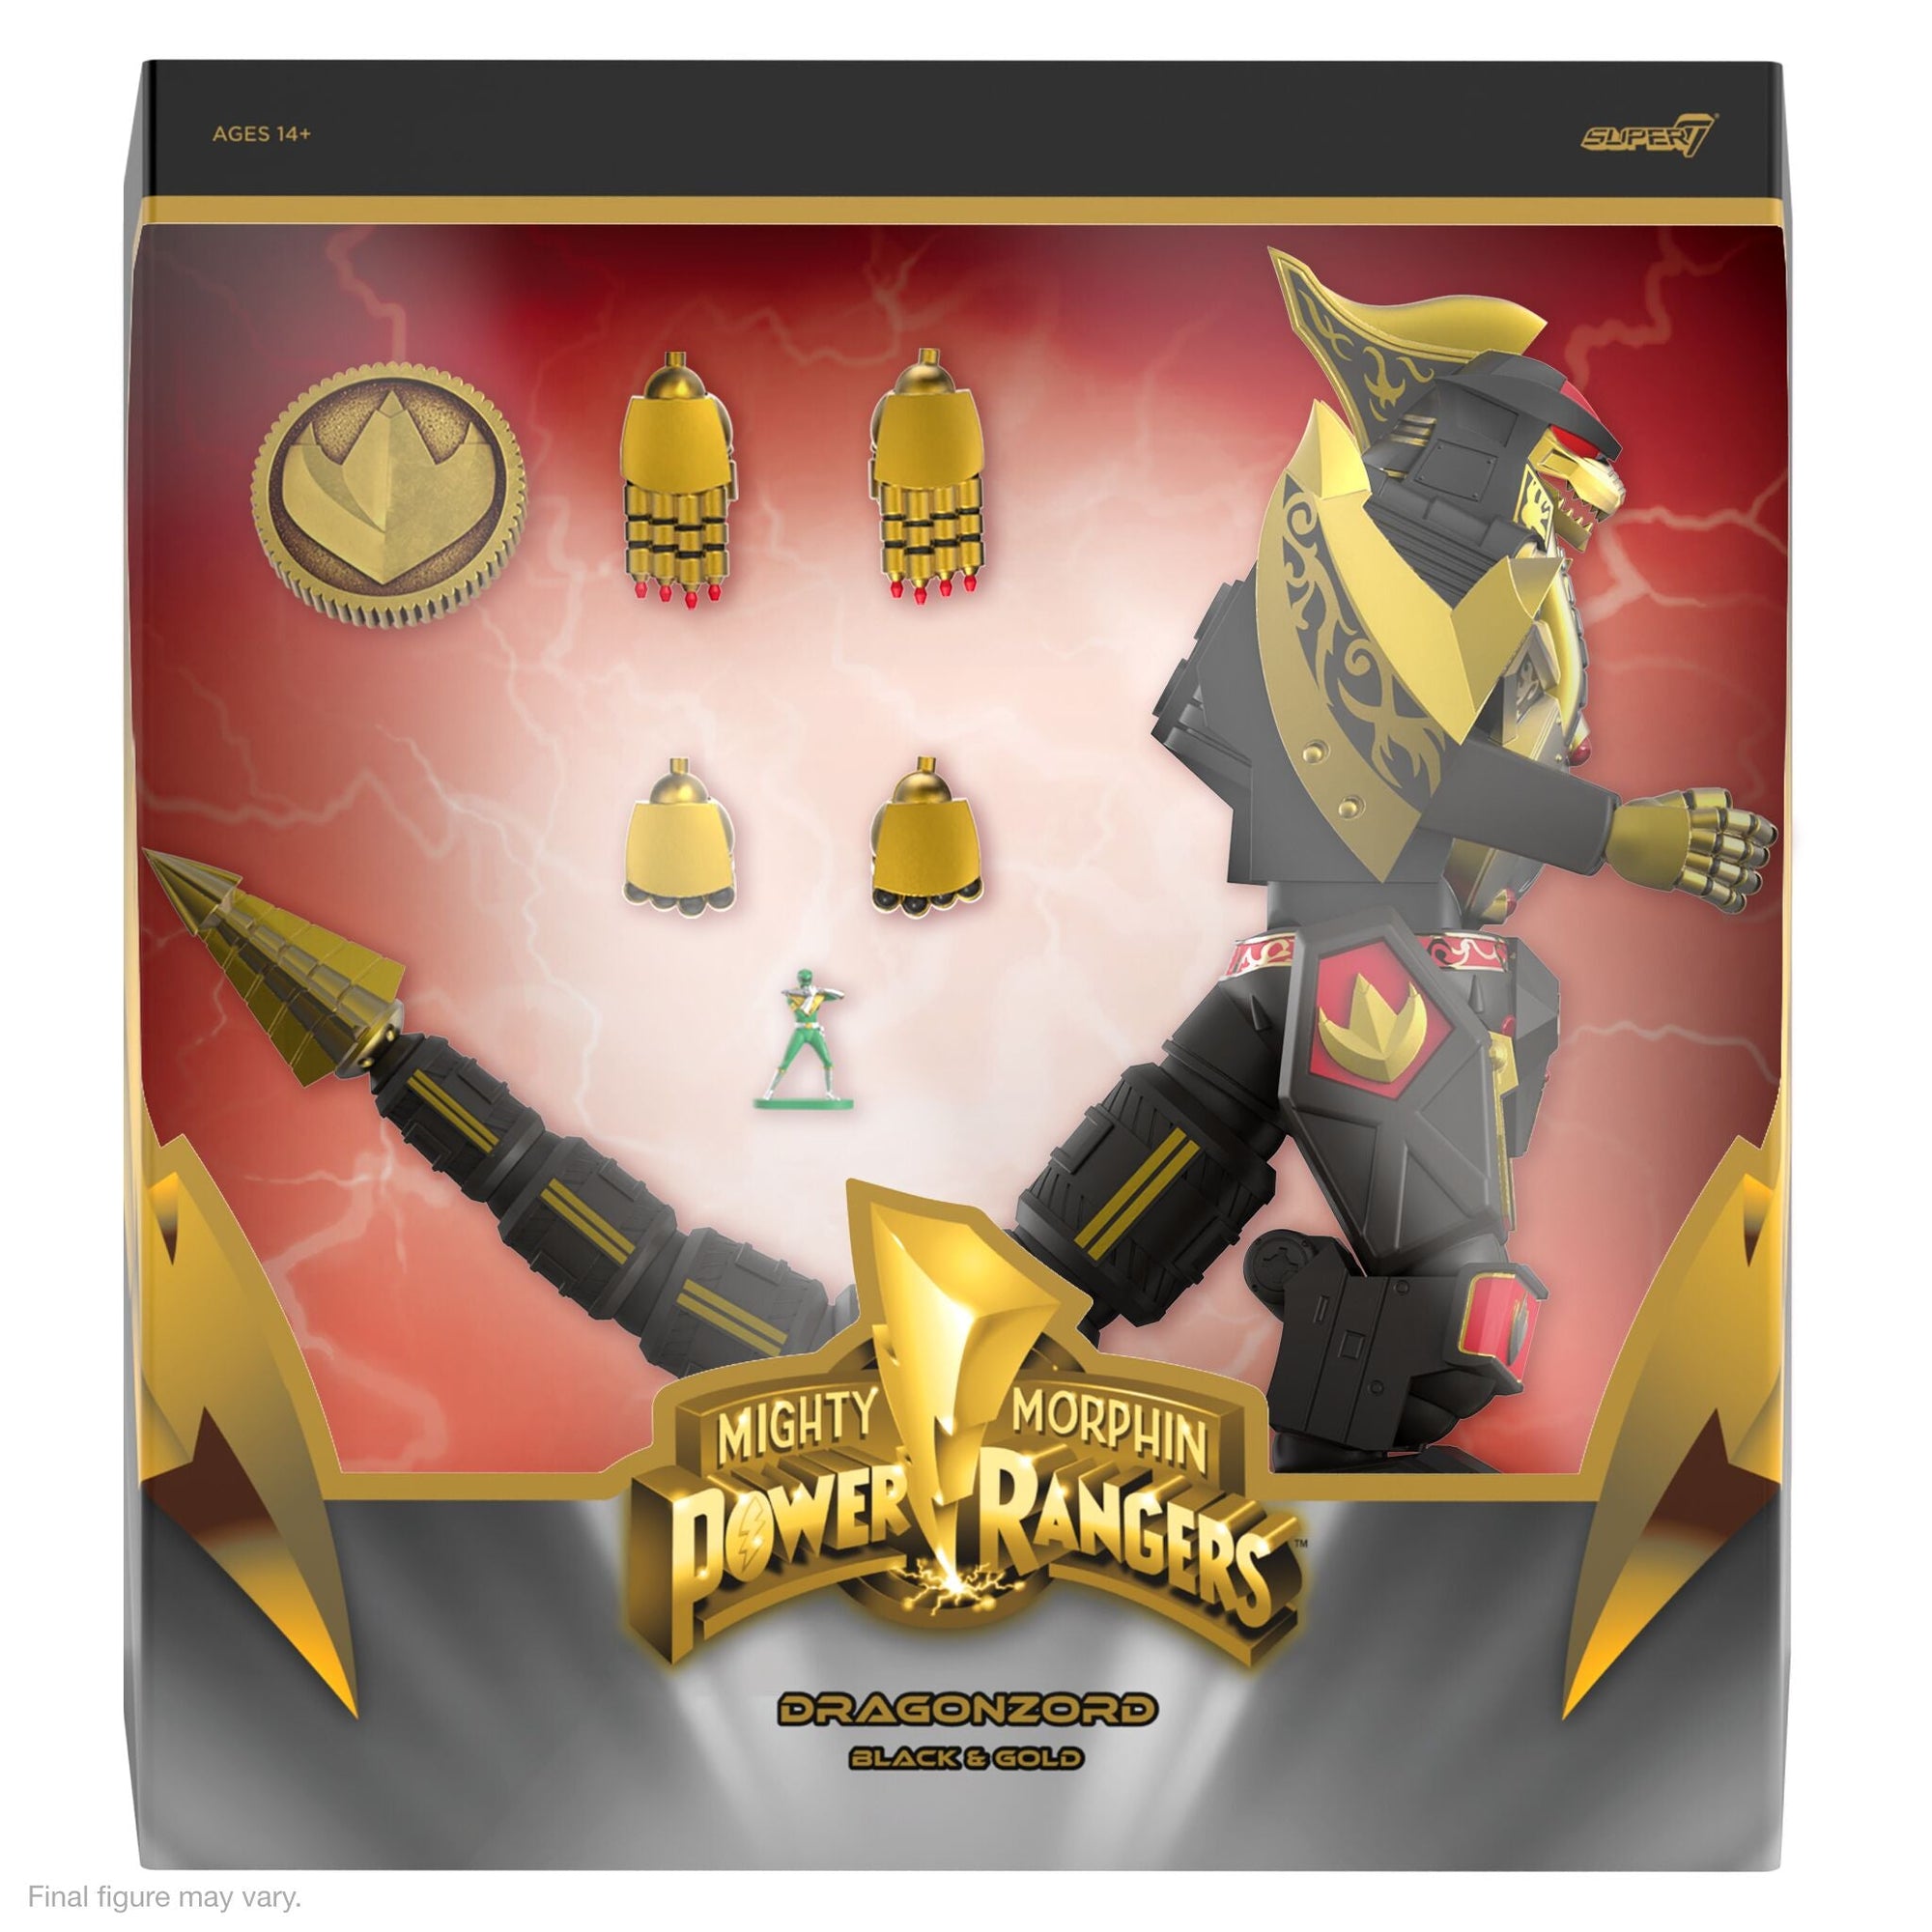 Dragonzord (Black & Gold) - Mighty Morphin Power Rangers - ULTIMATES! Figure by Super7